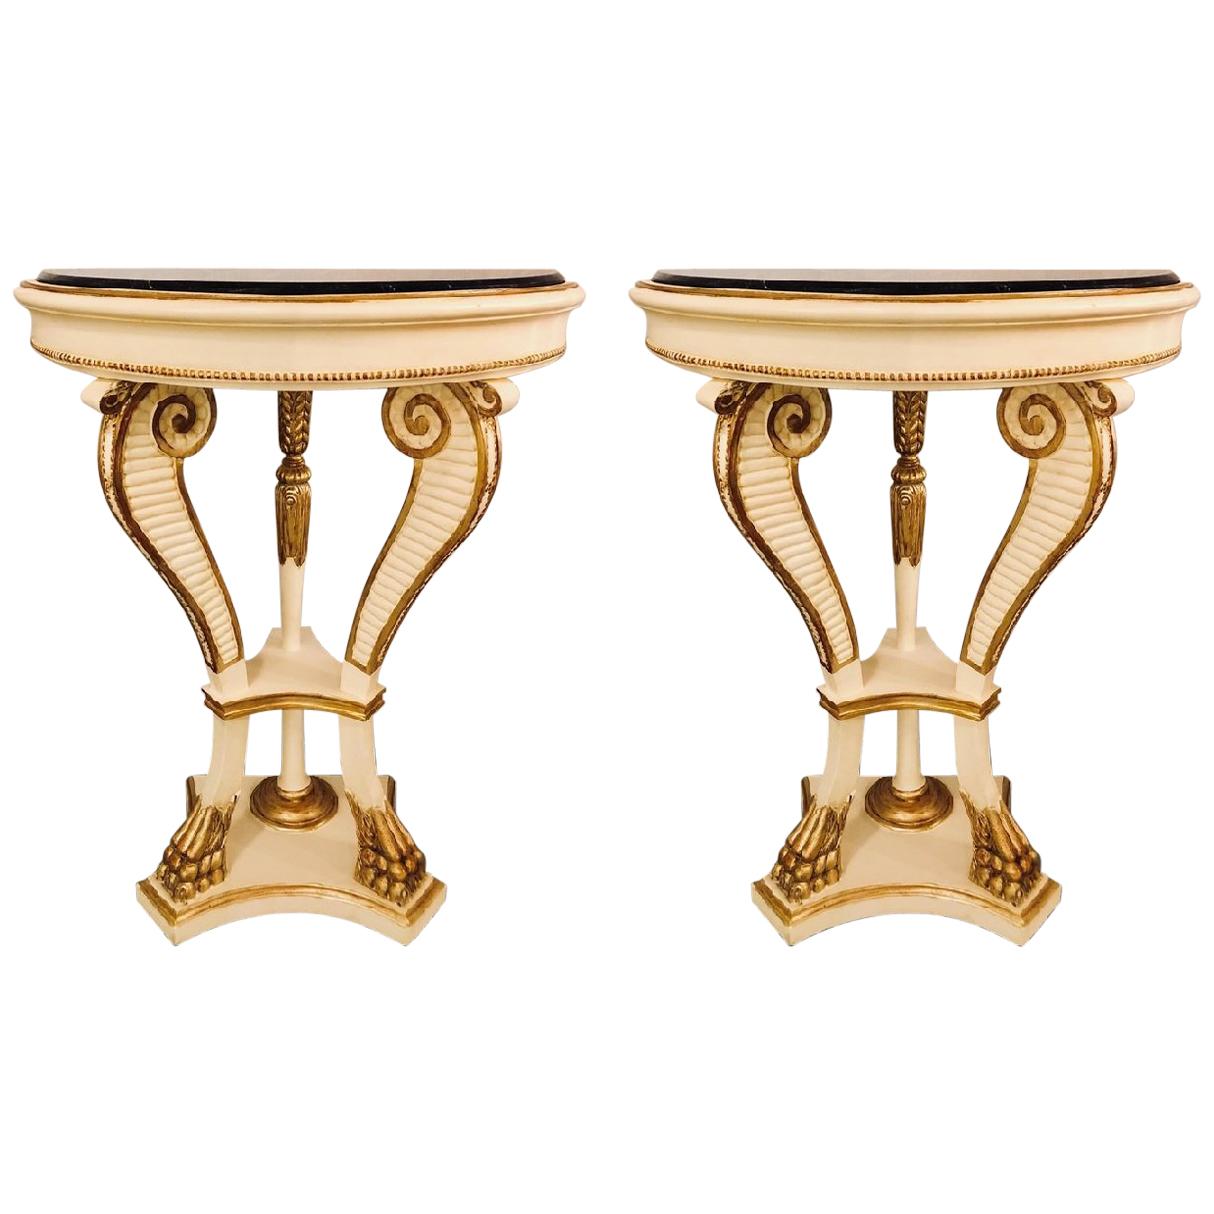 Pair of Parcel Paint and Gilt Decorated Marble-Top Demilune Console Tables